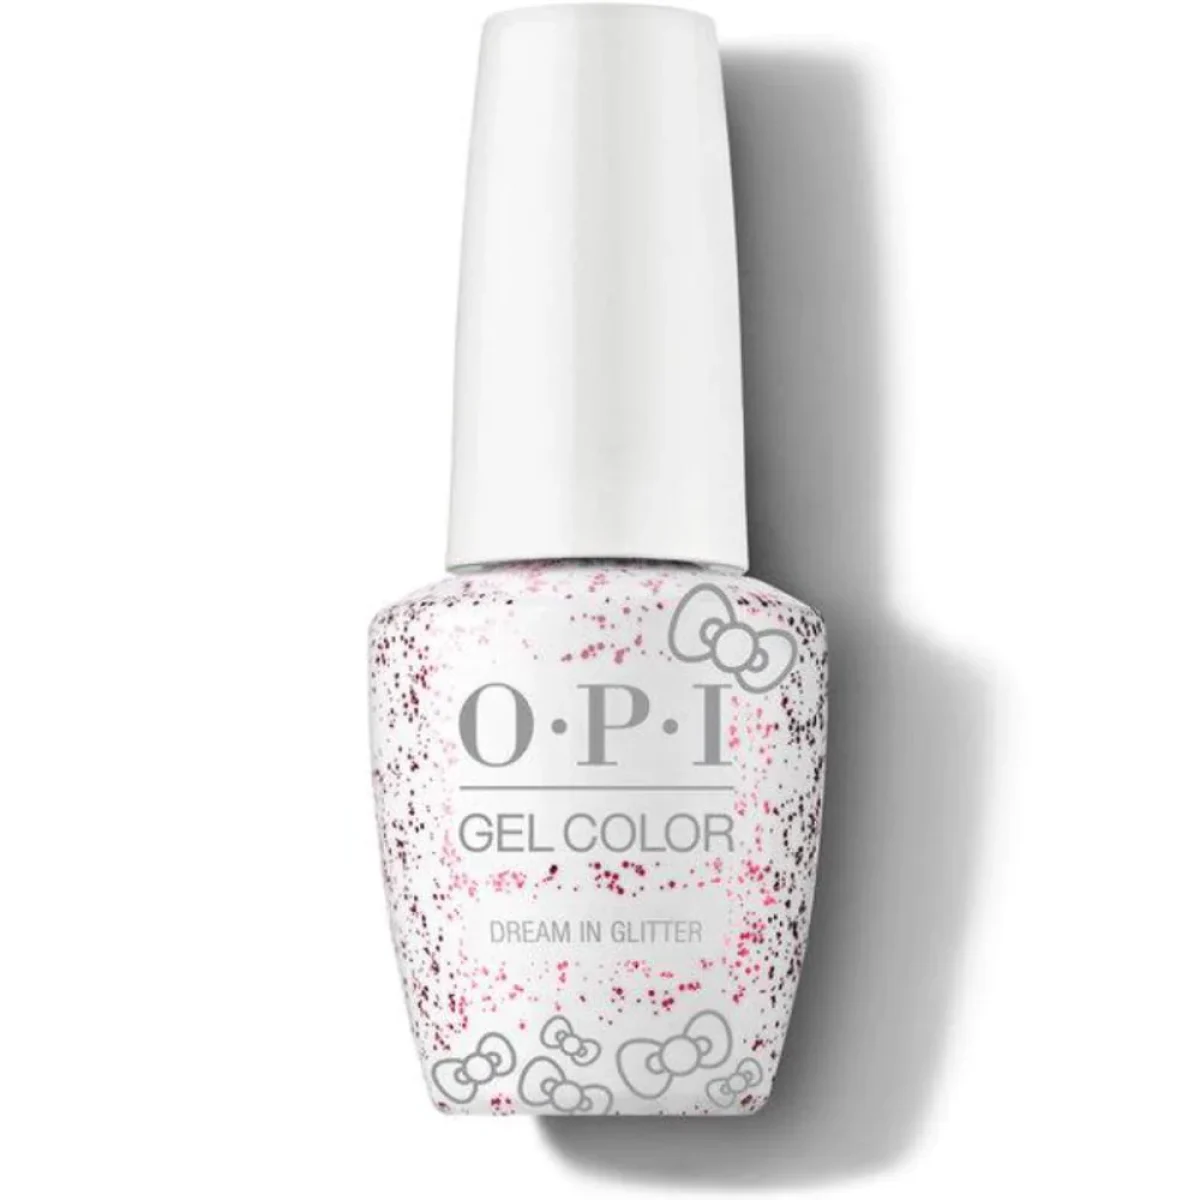 OPI Nail Lacquer - Rhinestone Red-y 0.5 oz - #HRP05